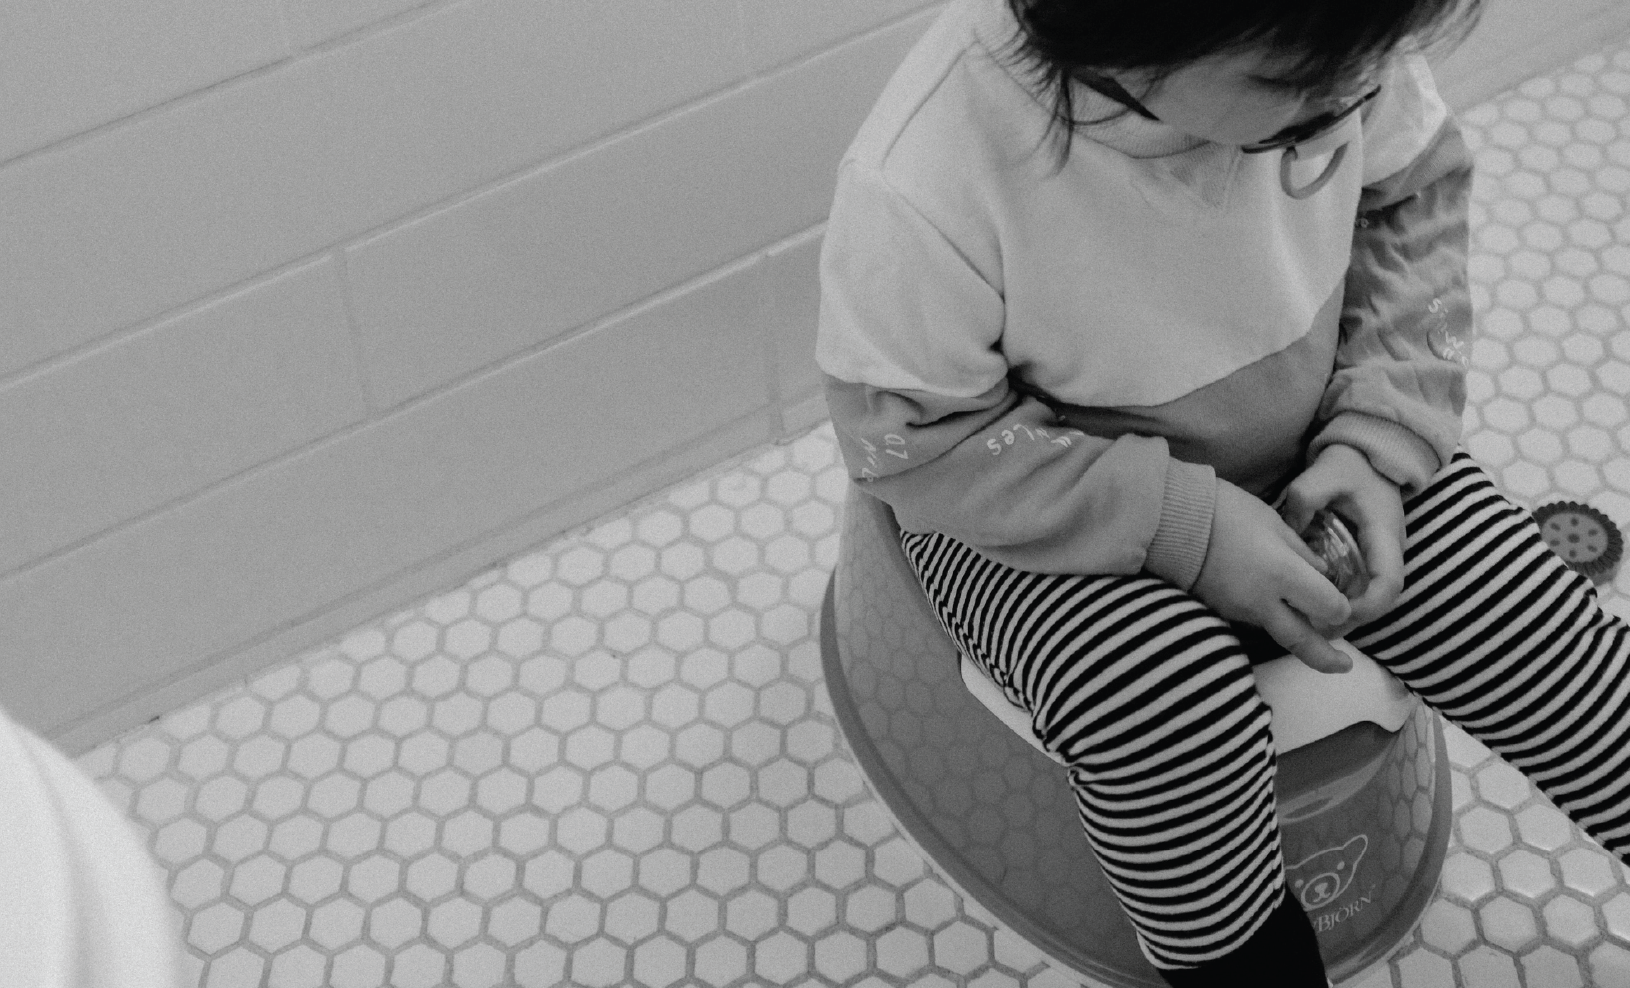 Our Potty Training Mistakes